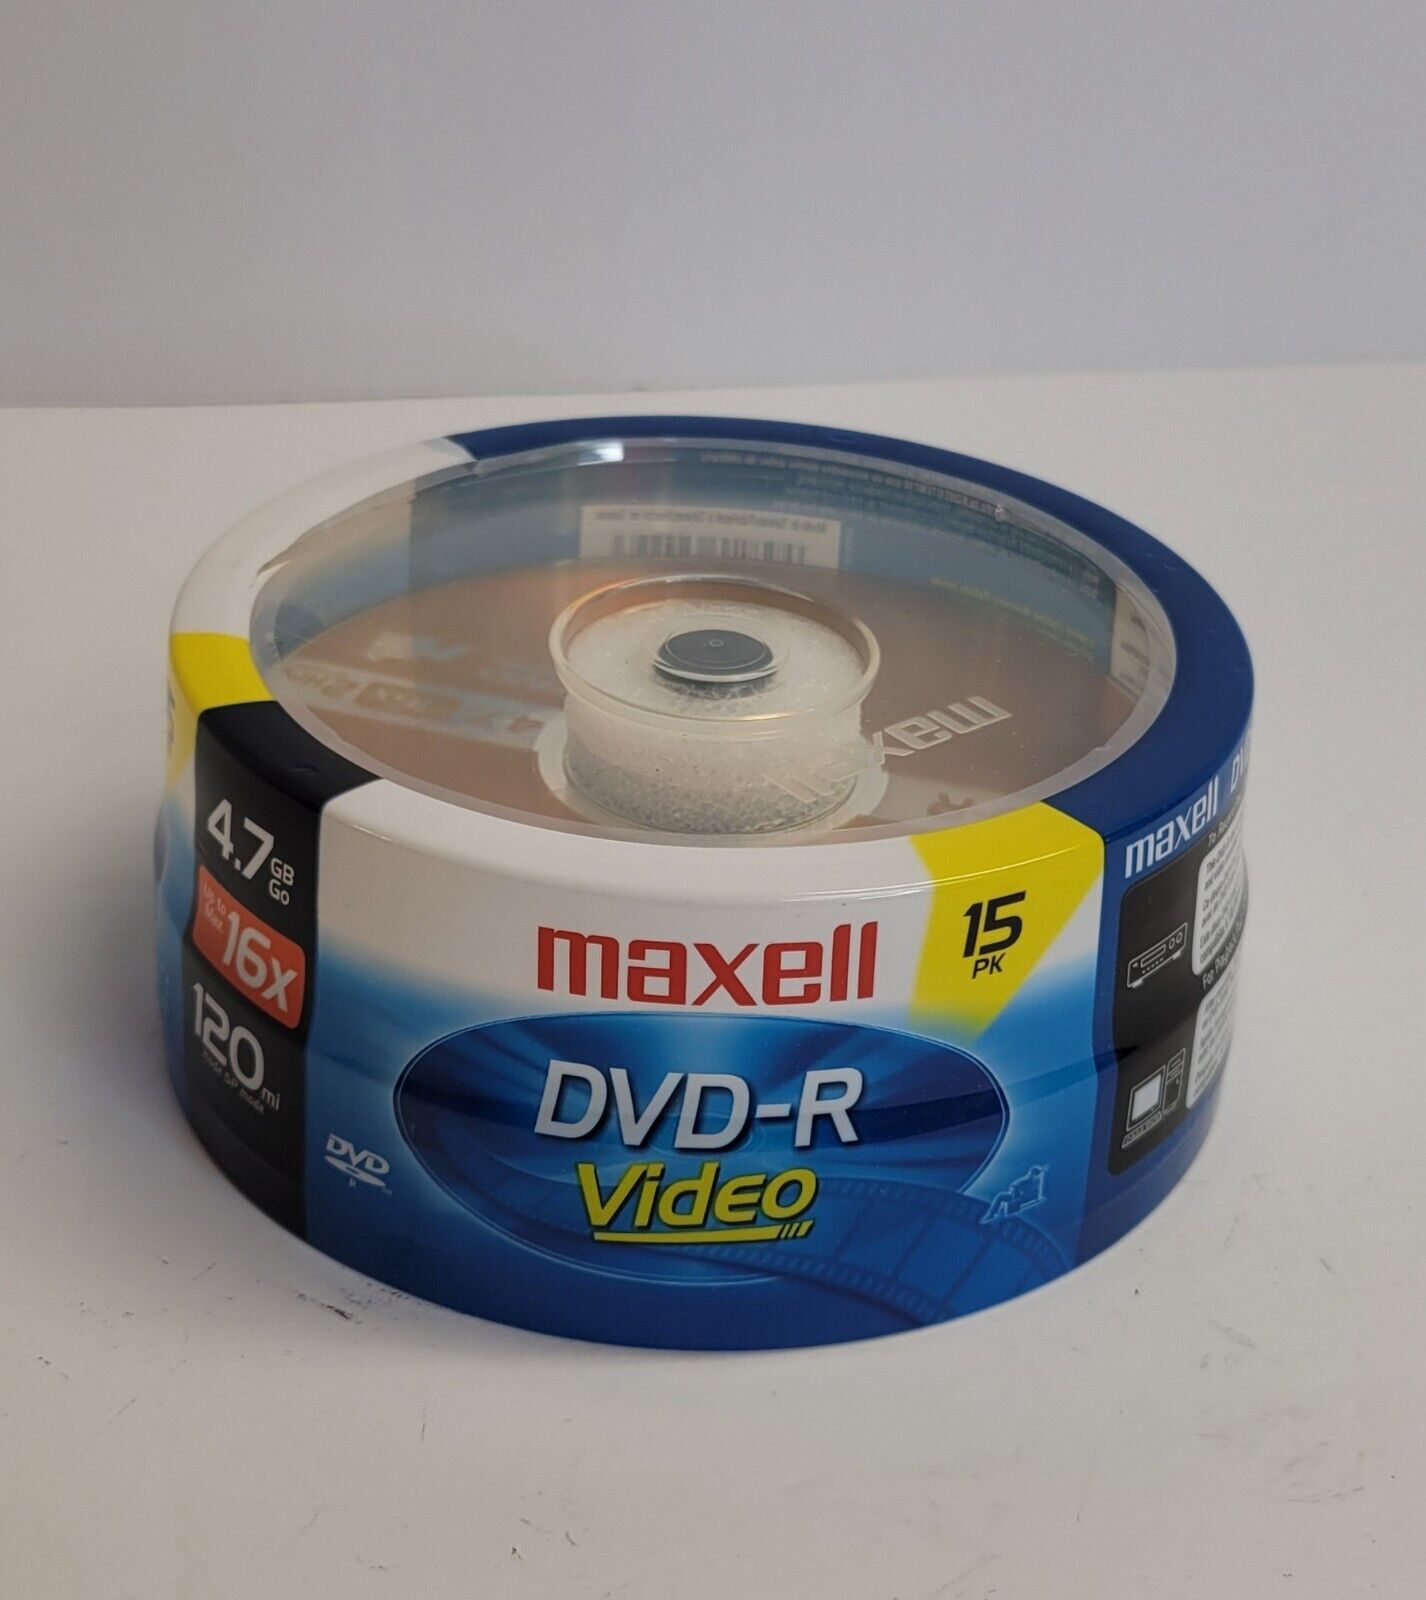 Maxell DVD-R 15PK Recordable Discs 4.7GB 16x 120 Min Spindle 15 Pk